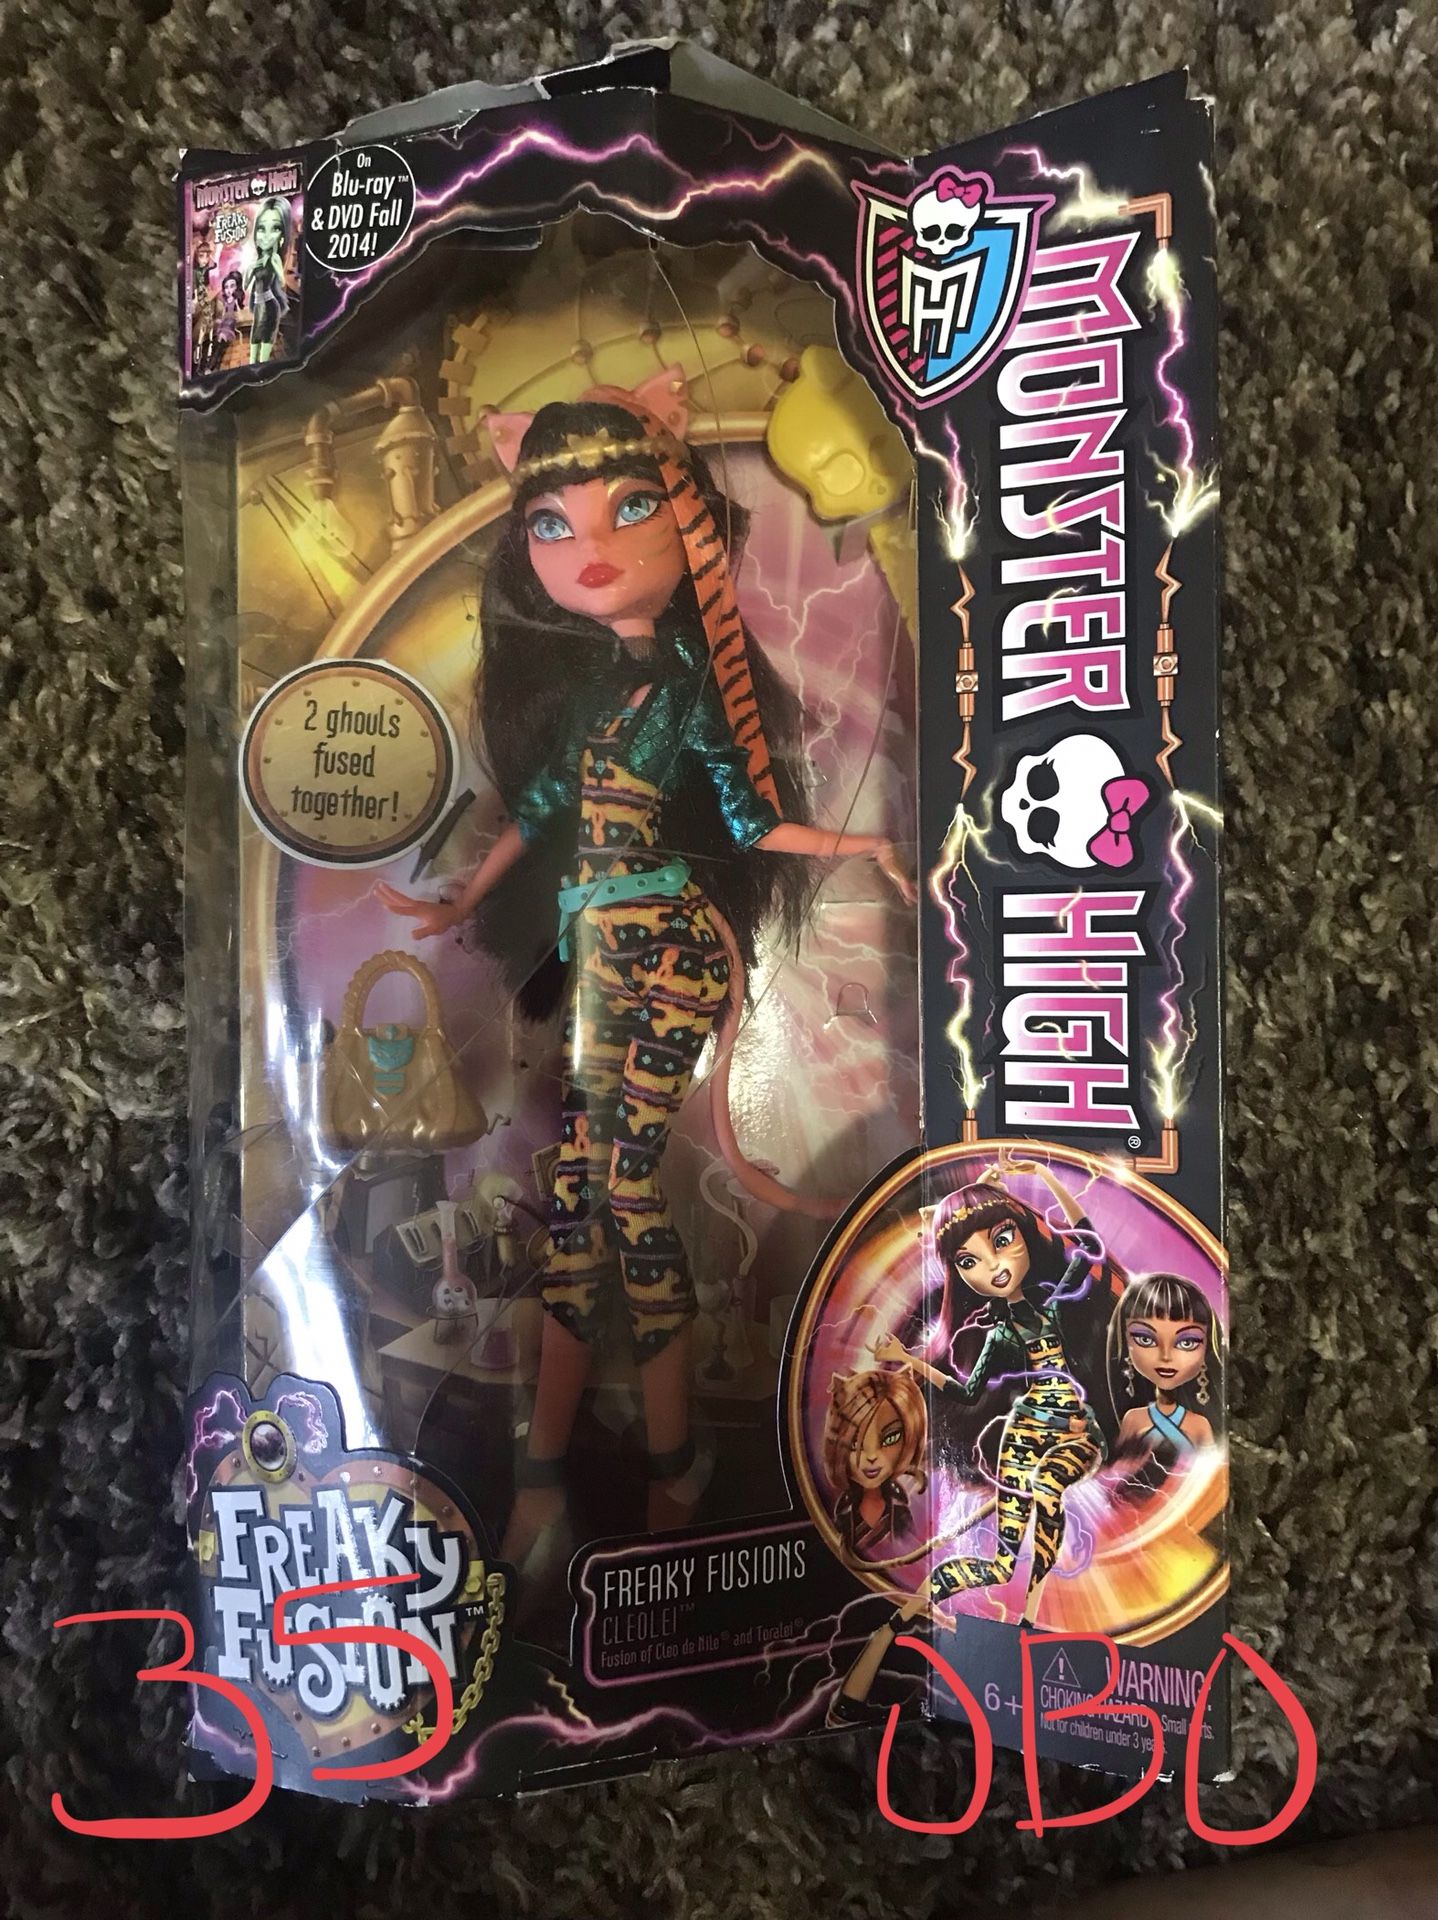 Freaky fusion monster high doll. Discontinued